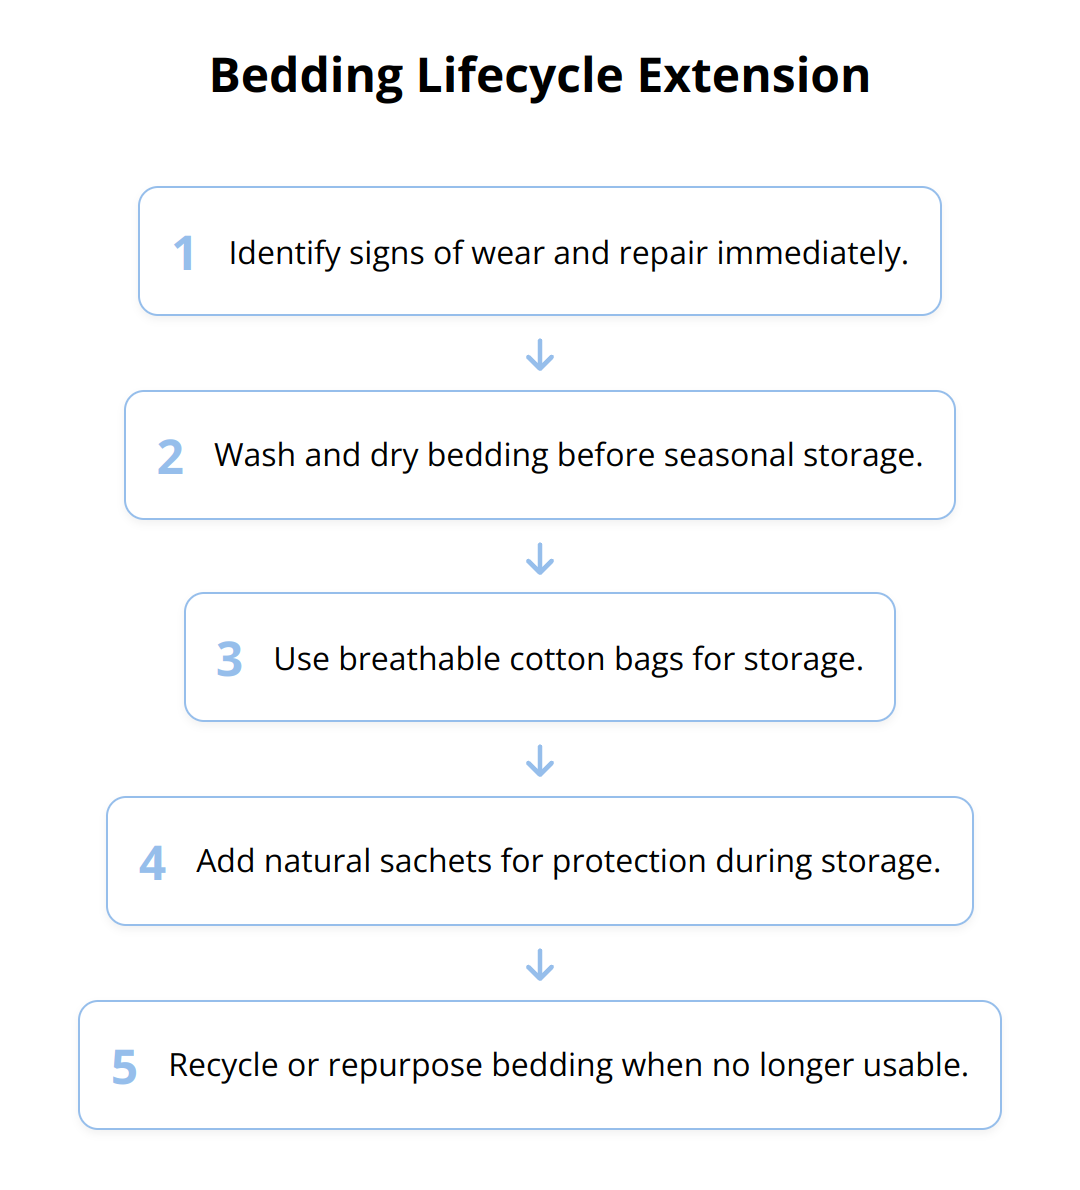 Flow Chart - Bedding Lifecycle Extension